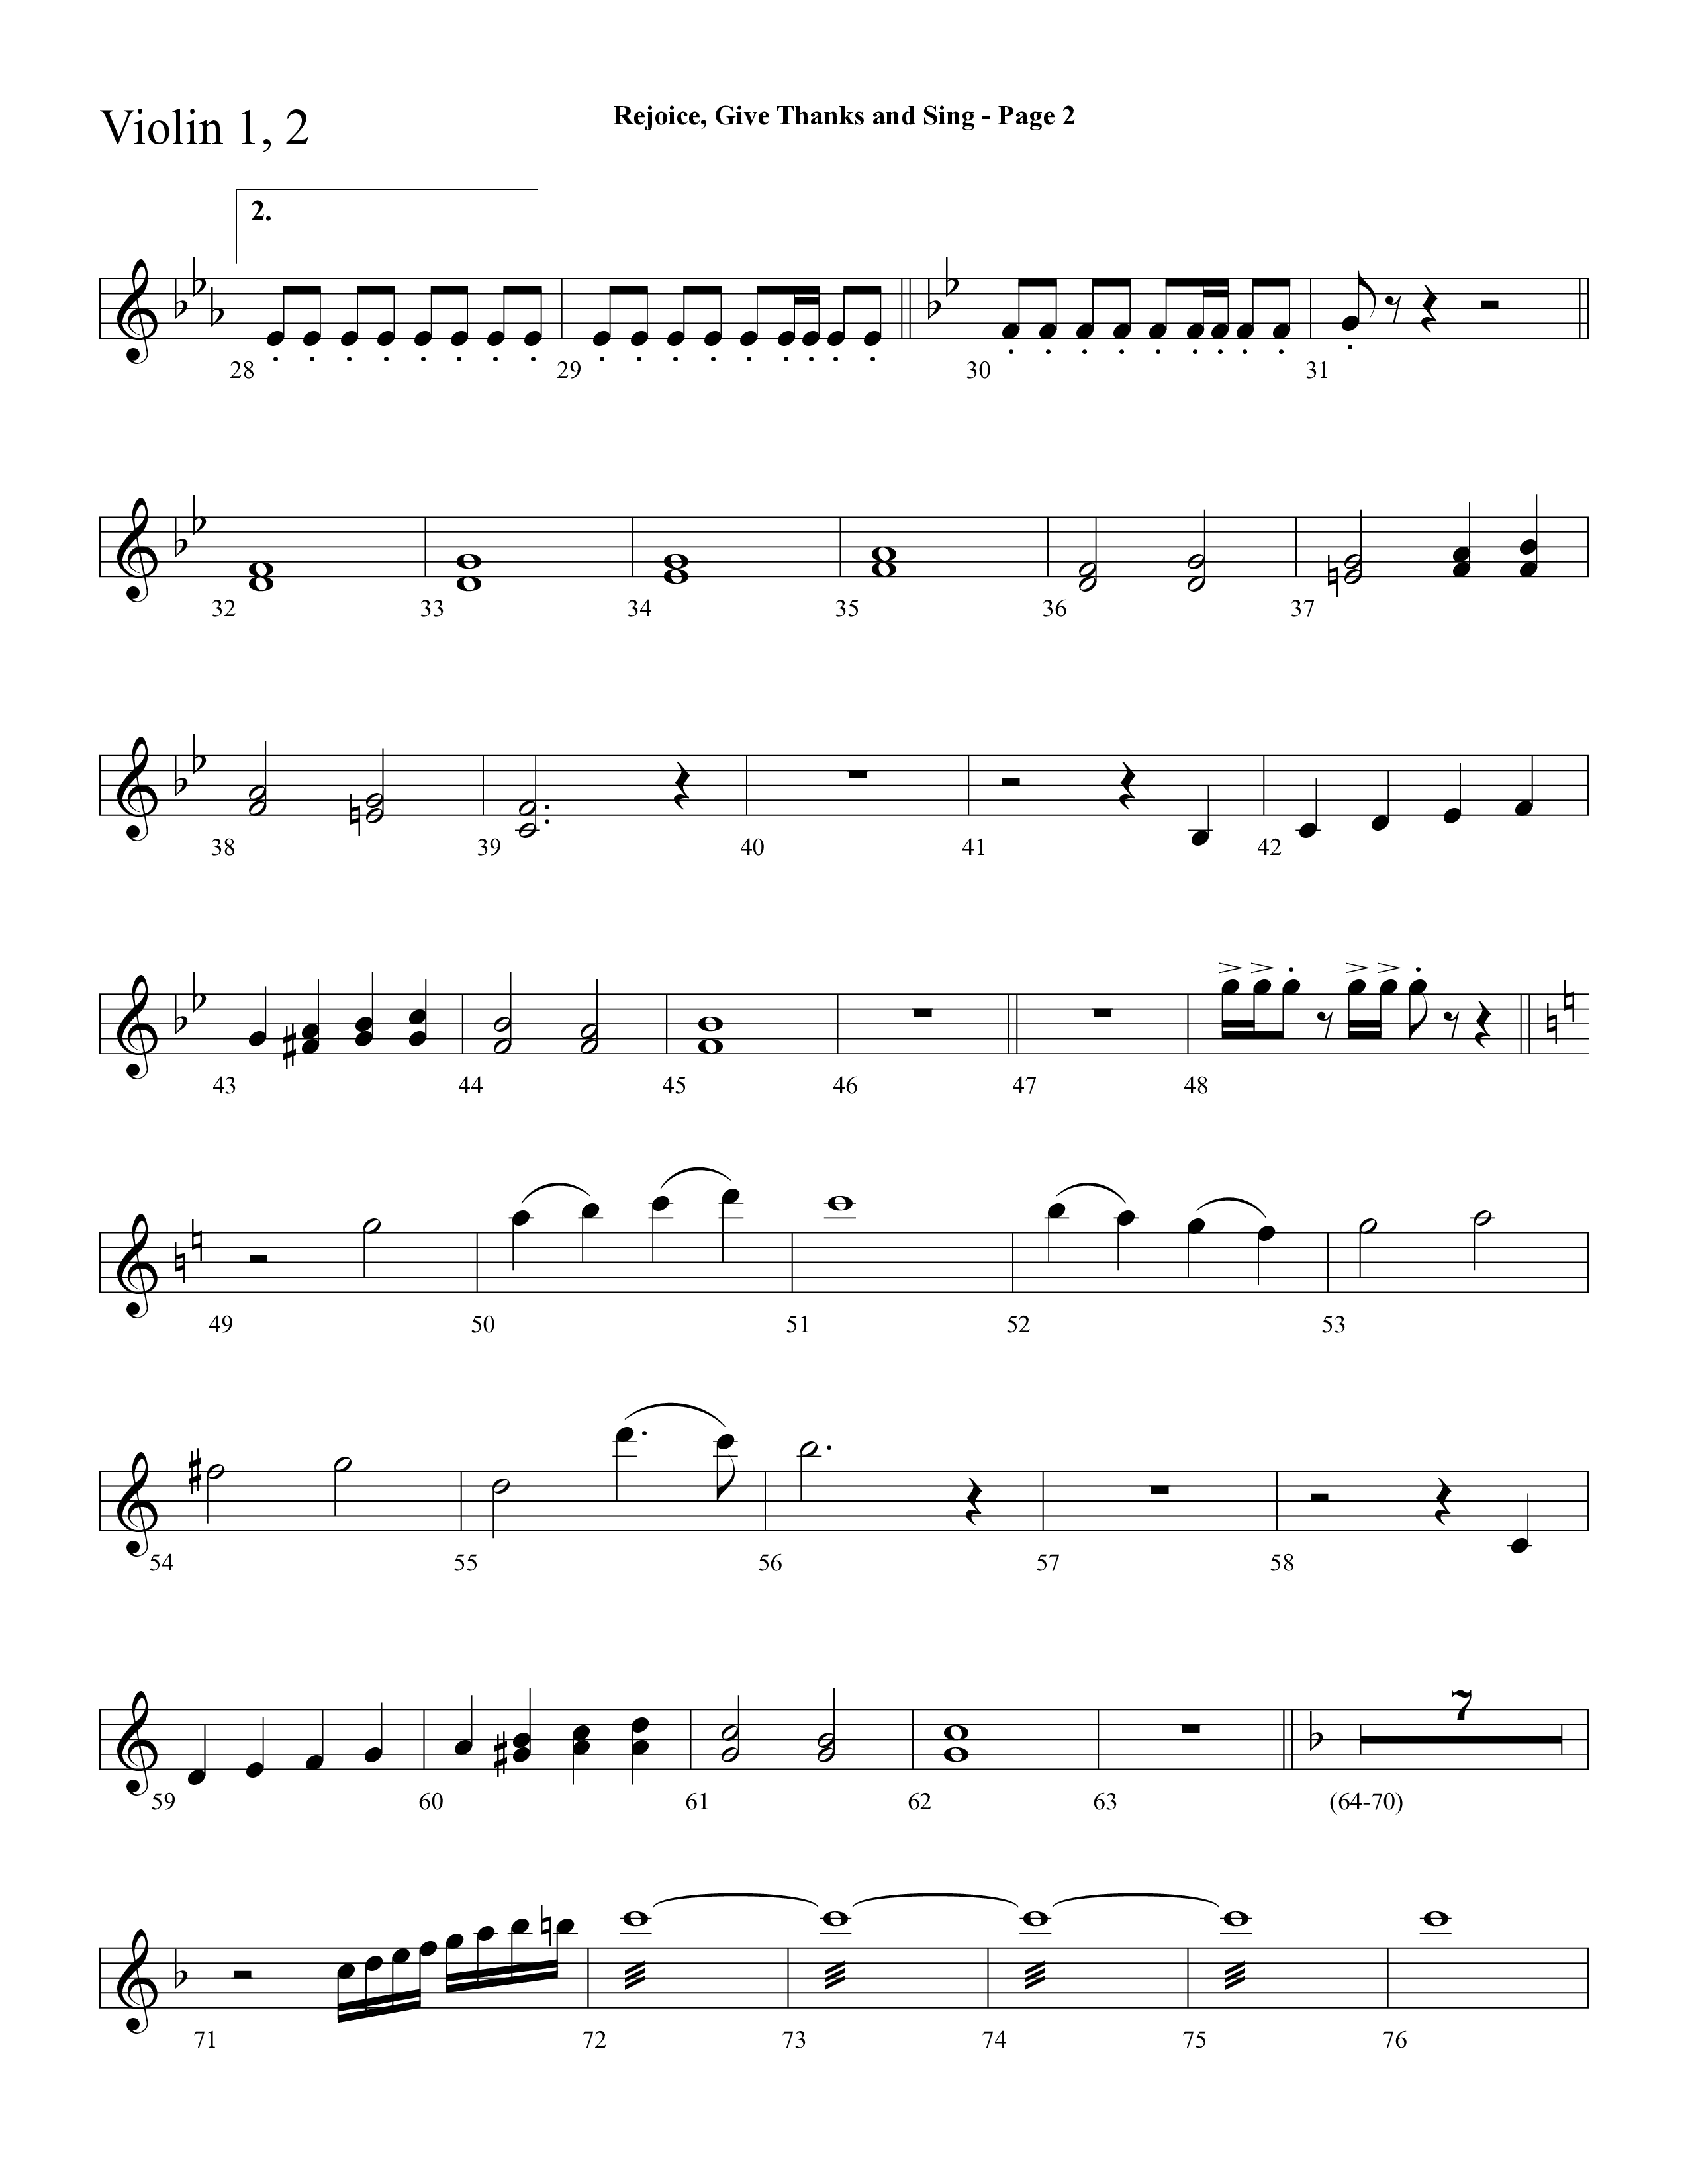 Rejoice, Give Thanks And Sing (with Rejoice, The Lord Is King, Come, Thou Almighty King) (Choral Anthem SATB) Violin 1/2 (Lifeway Choral / Arr. Dave Williamson)